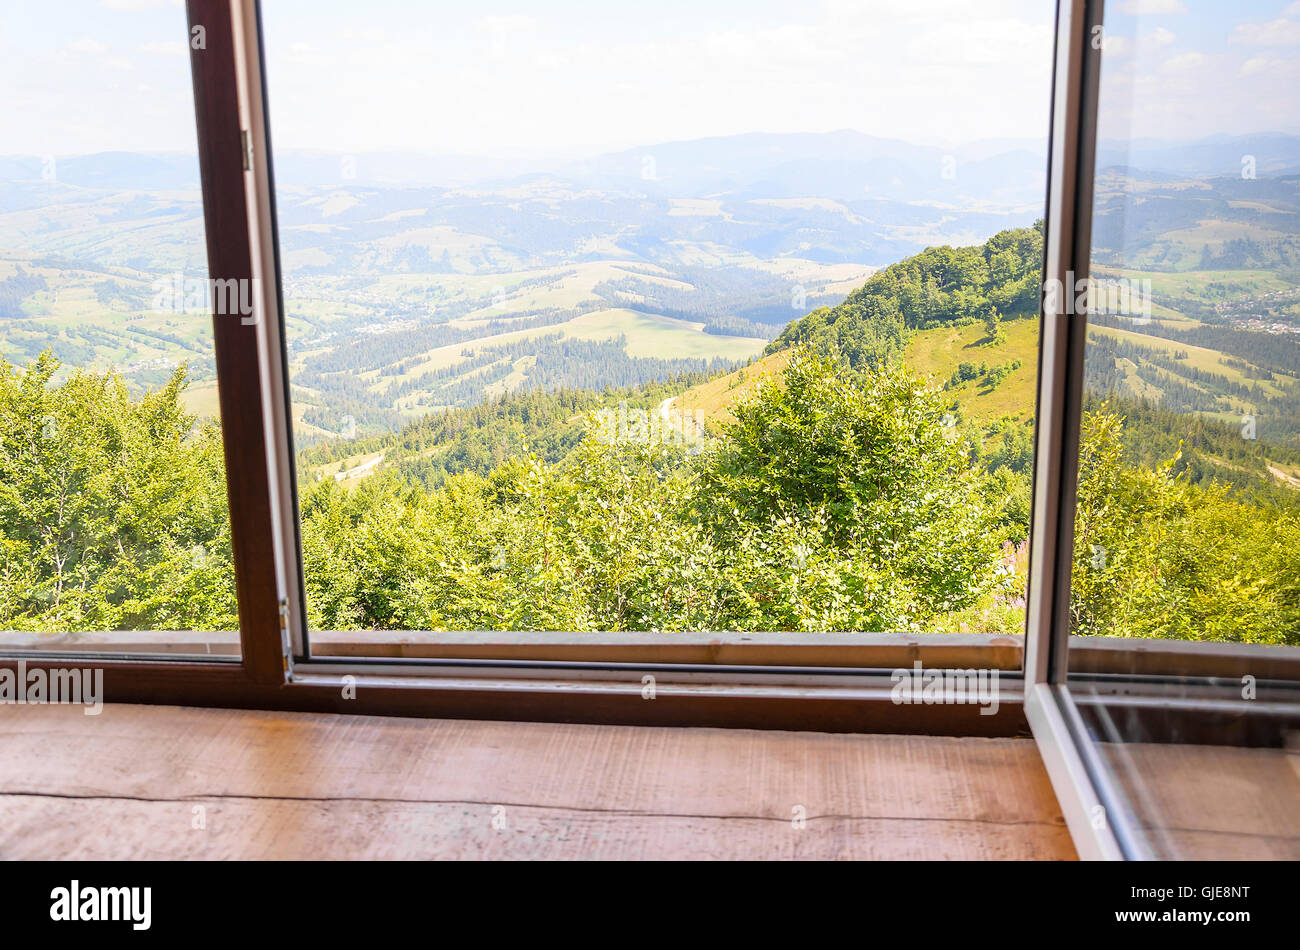 The old window with views of the beautiful mountains. Stock Photo